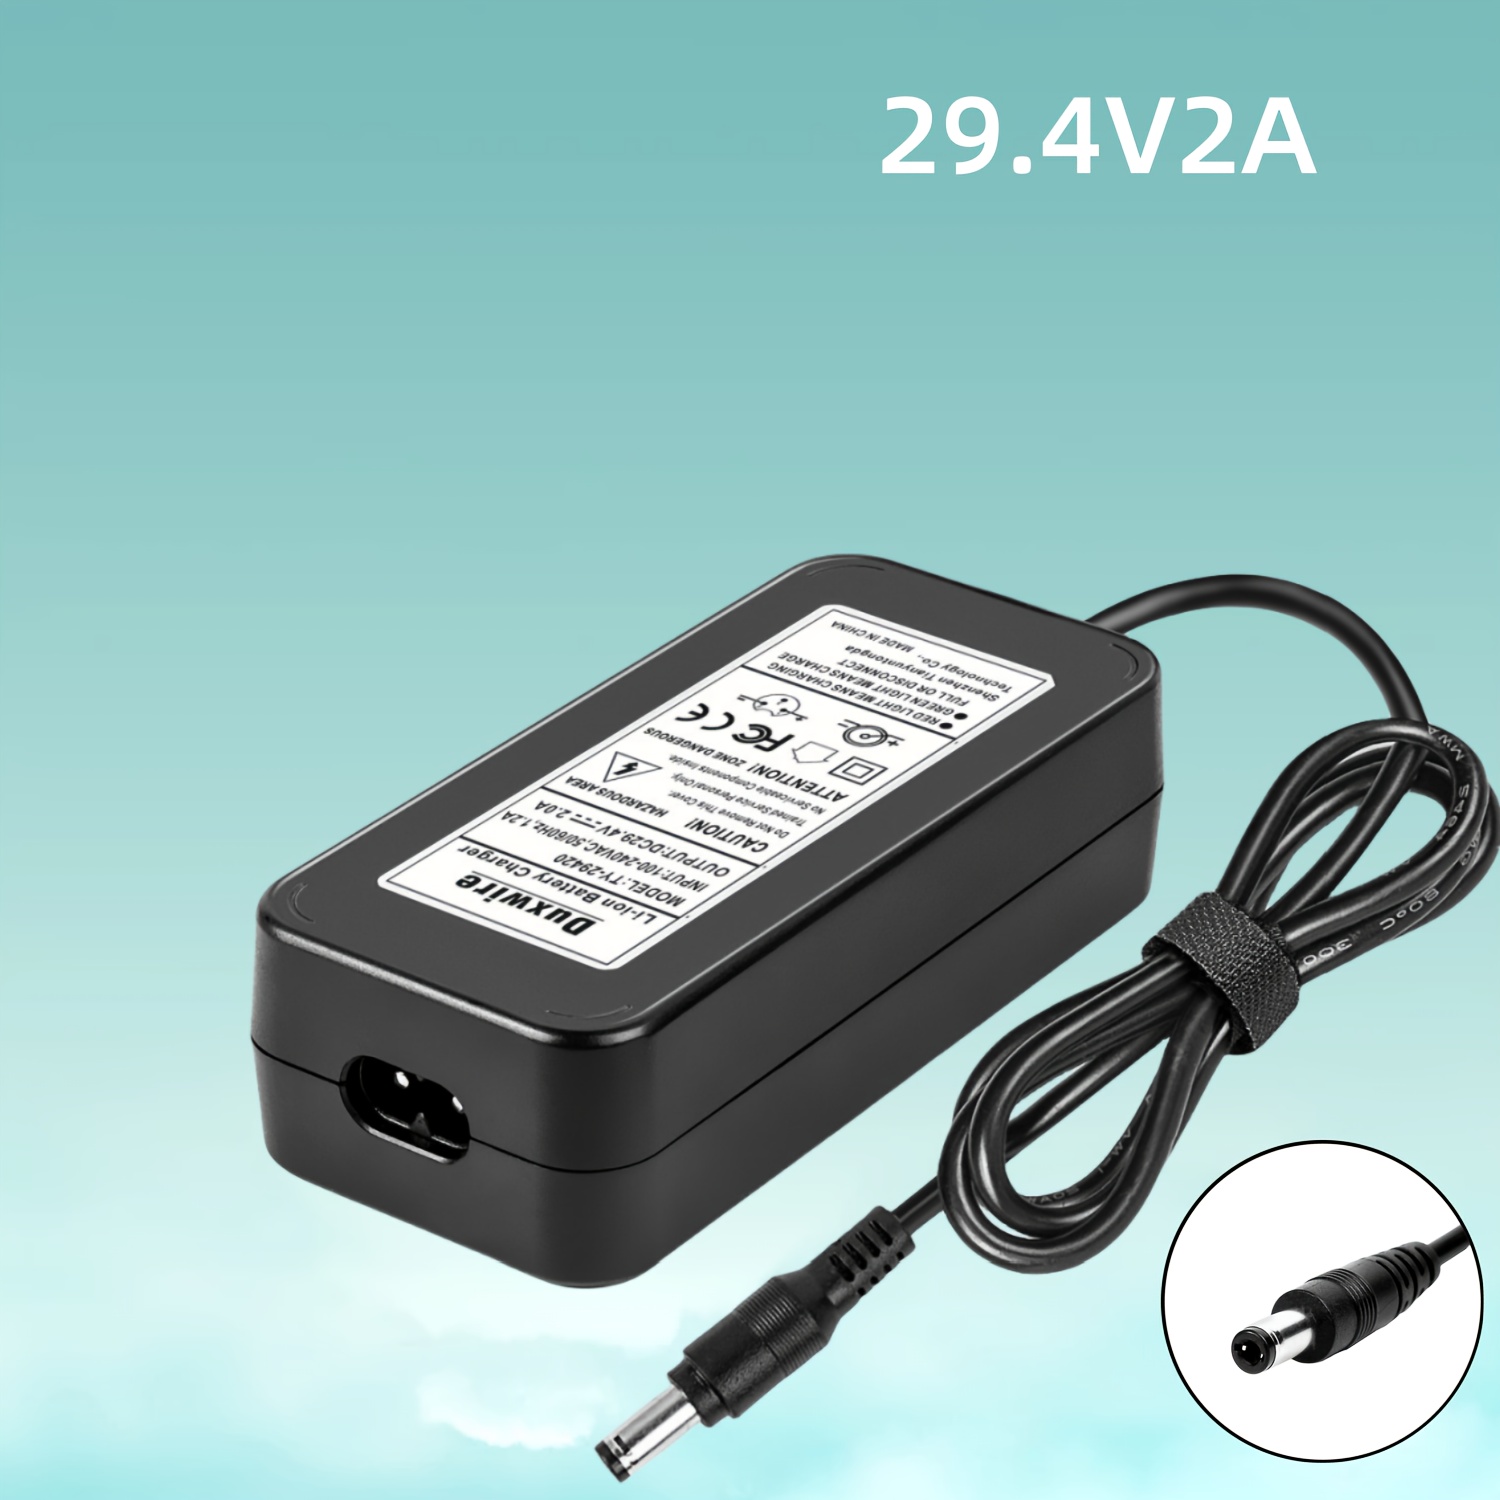 Lithium Ion Battery Charger for Electric Bike Scooter Power Supply